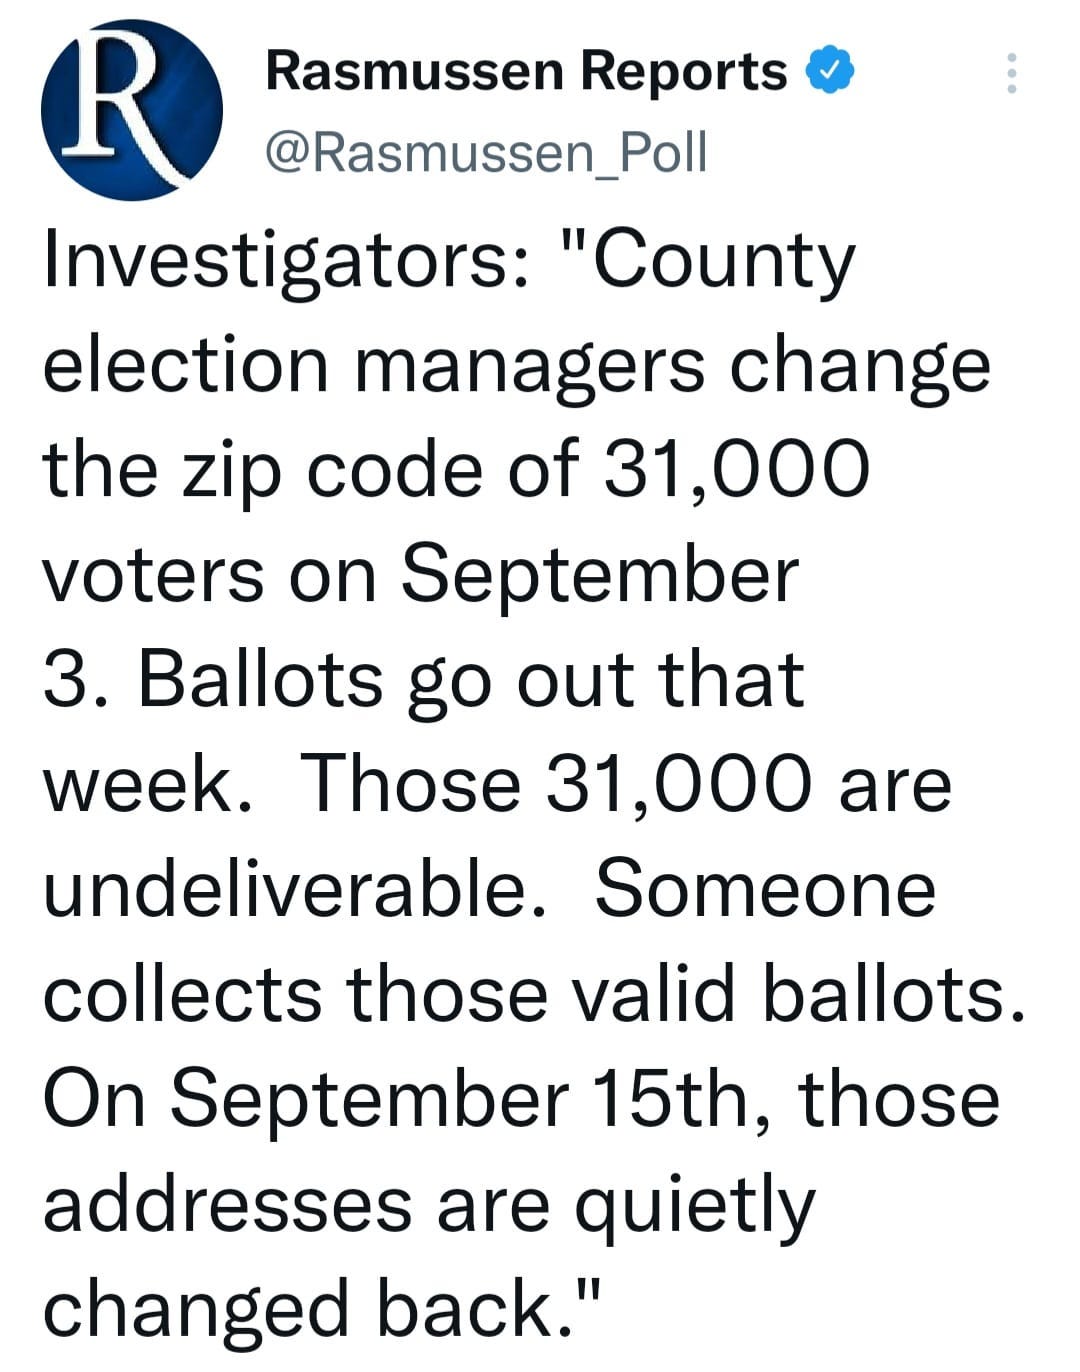 May be an image of text that says 'Rasmussen Reports @Rasmussen_Poll Investigators: "County election managers change the zip code of 31,000 voters on September 3. Ballots go out that week. Those 31,000 are undeliverable. Someone collects those valid ballots. On September 15th, those addresses are quietly changed back."'